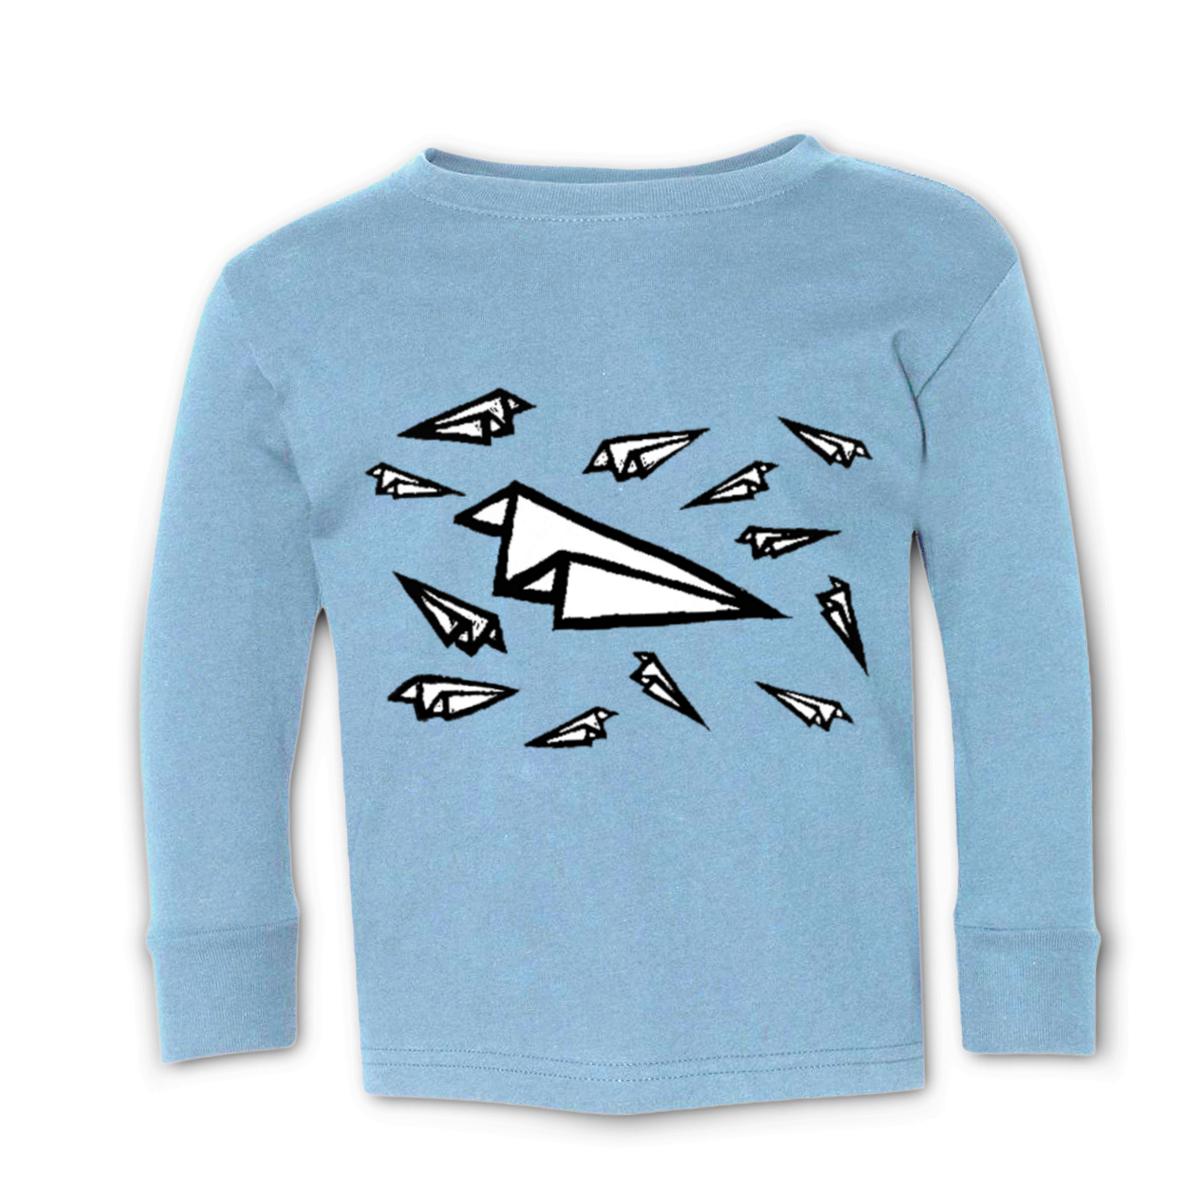 Airplane Frenzy Toddler Long Sleeve Tee 56T light-blue